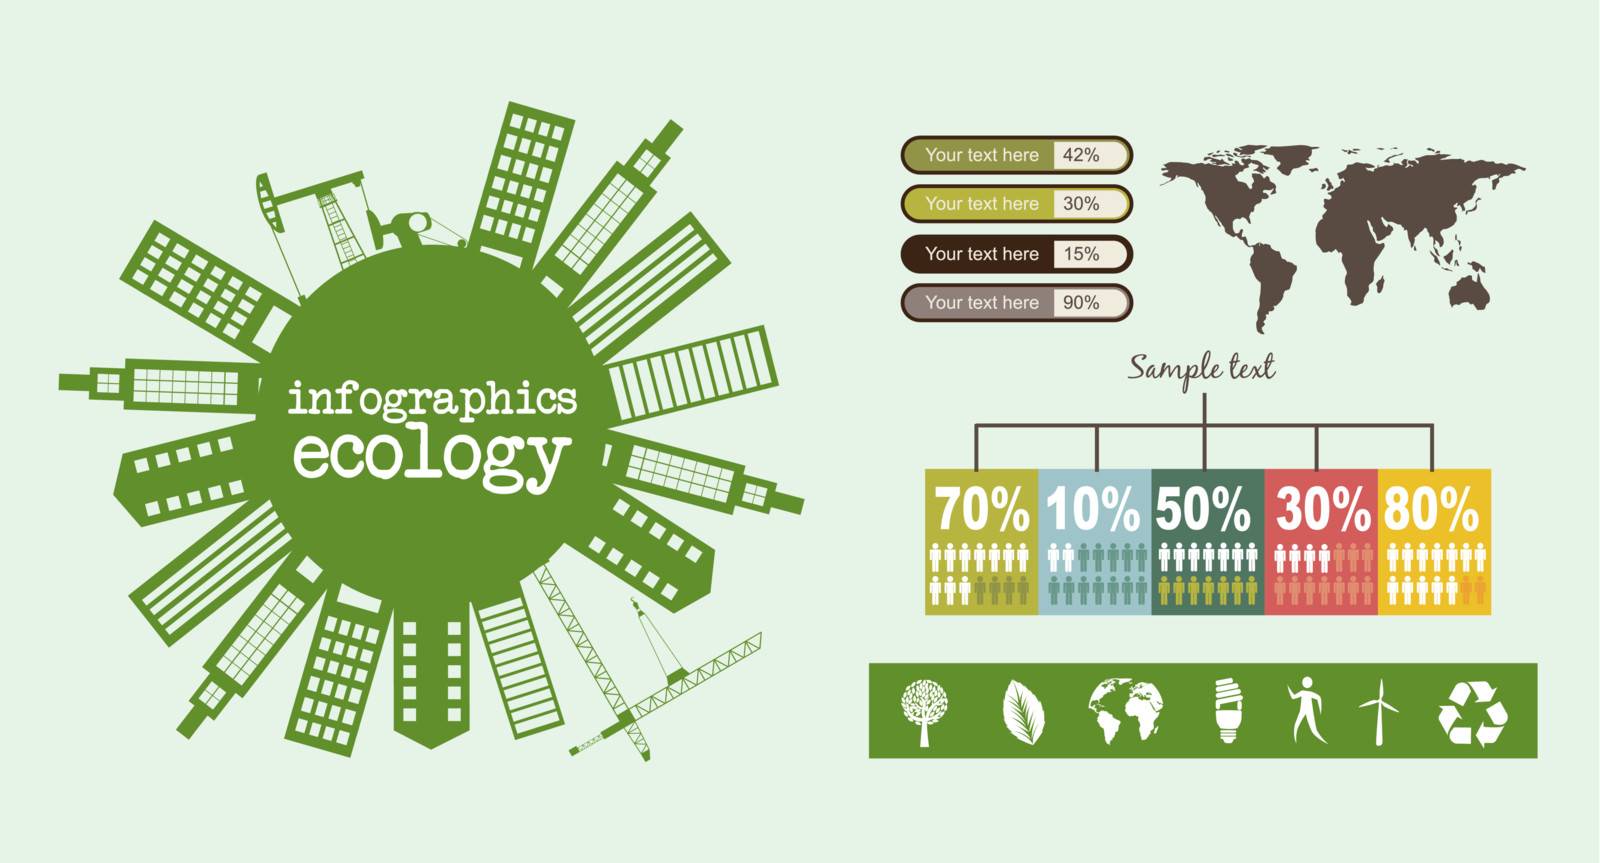 infographics ecology with buildings, vintage style. vector illustration